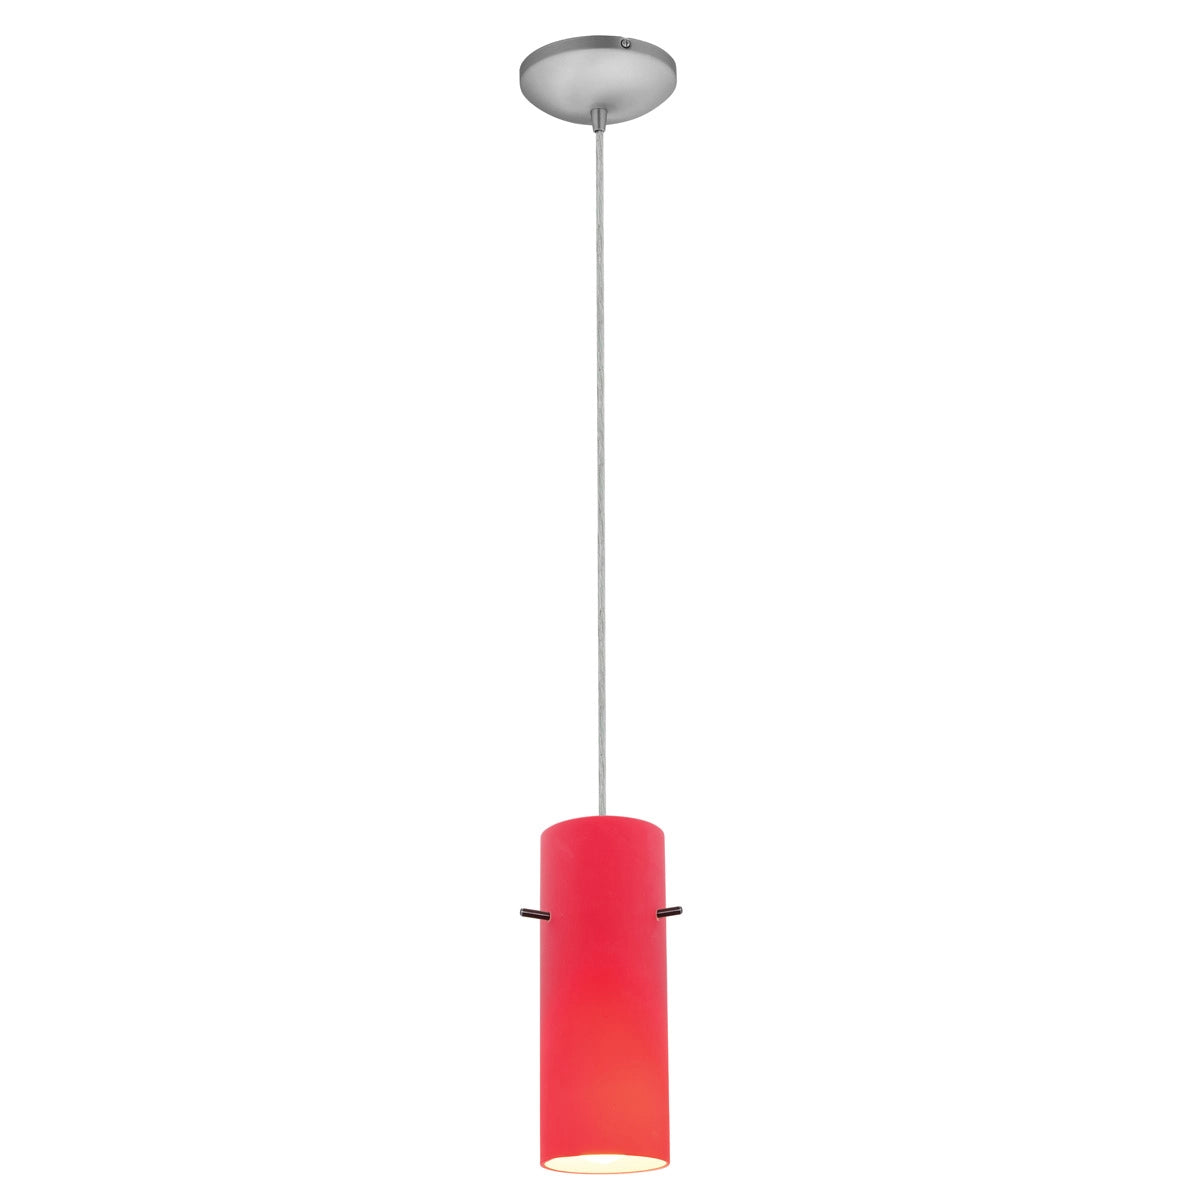 Cylinder 4 in. LED Pendant Light, Red Glass - Bees Lighting